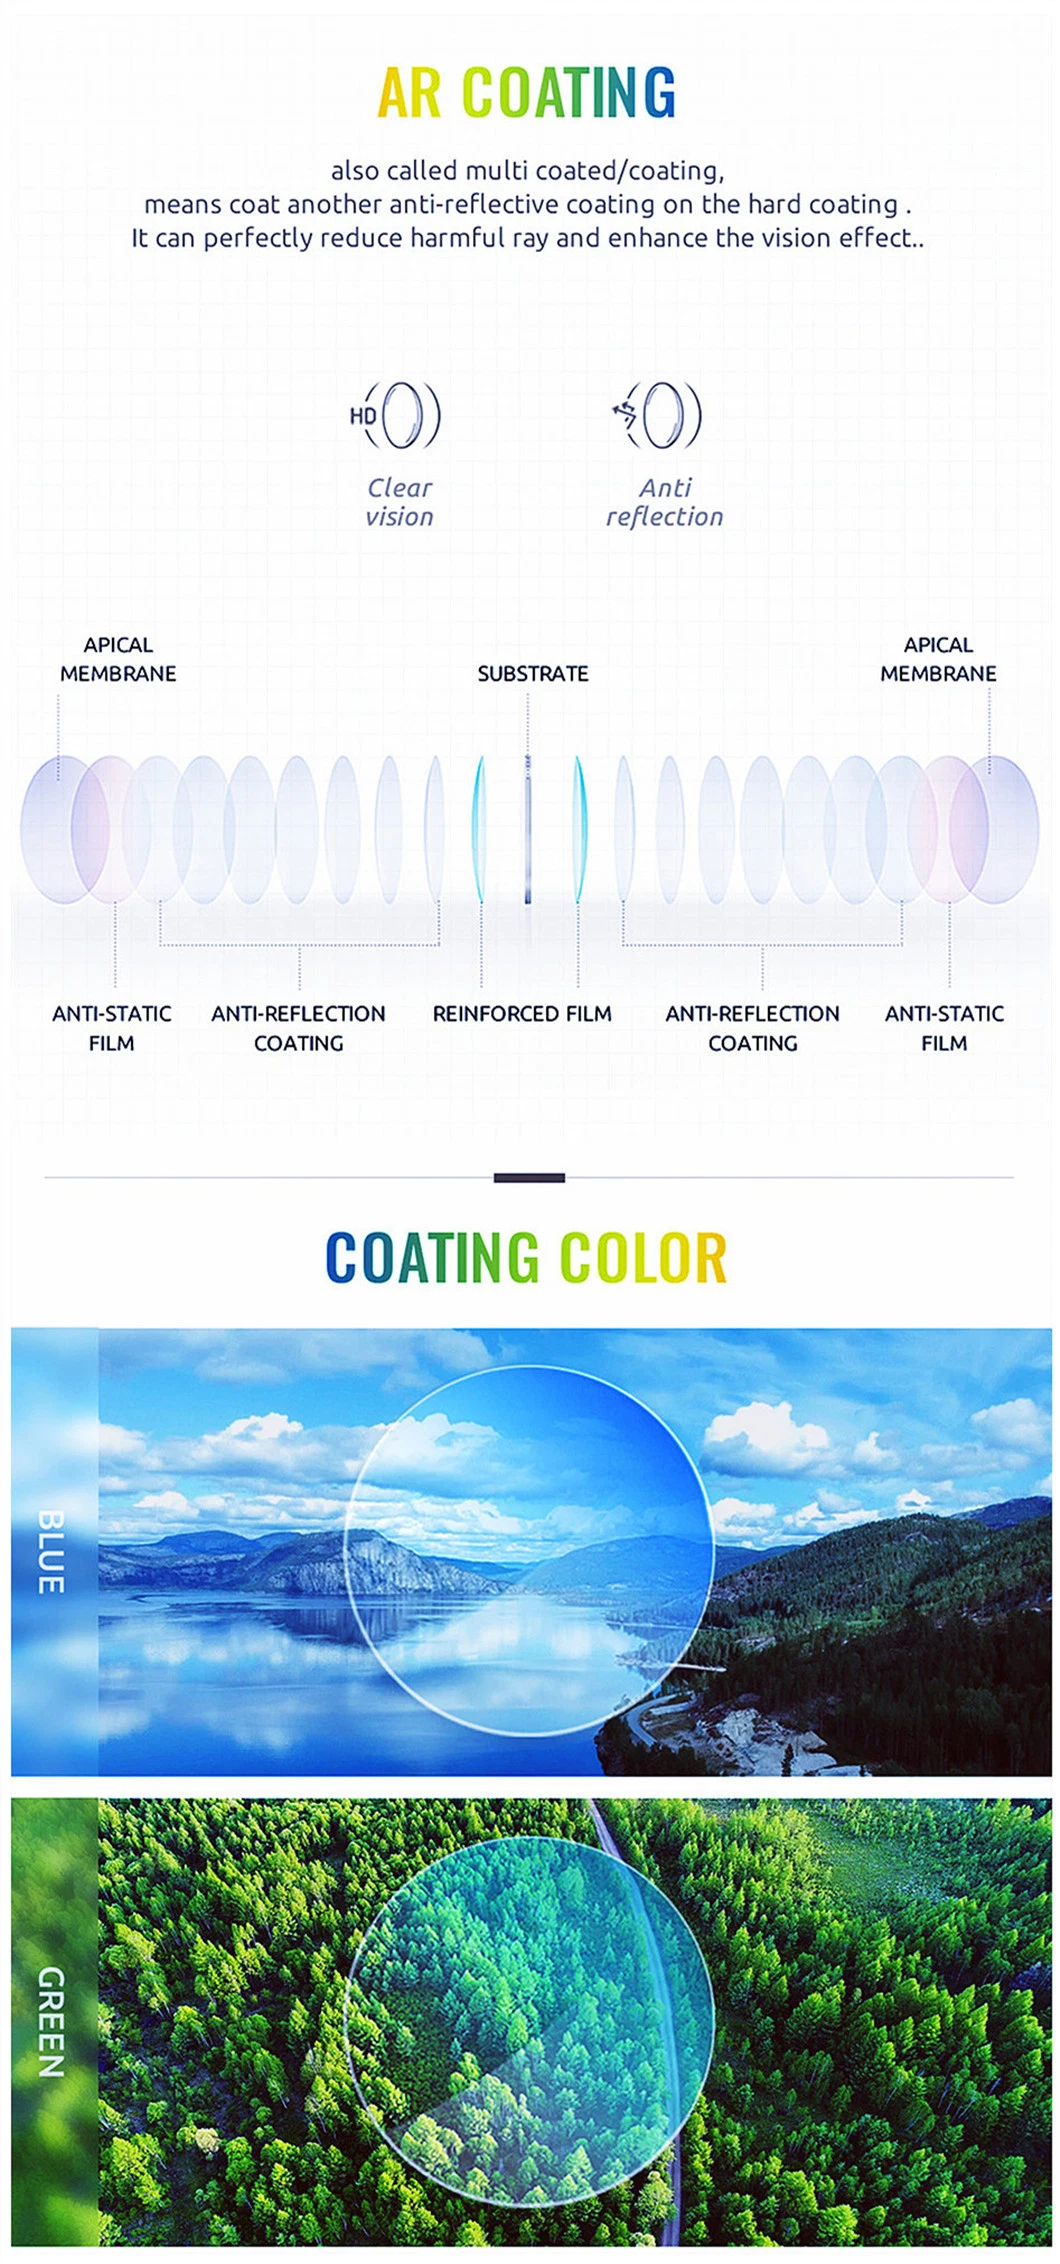 Optical Lens Suppliers 1.59 Spin Polycarbonate Photochromic Hmc Transition Lenses Price